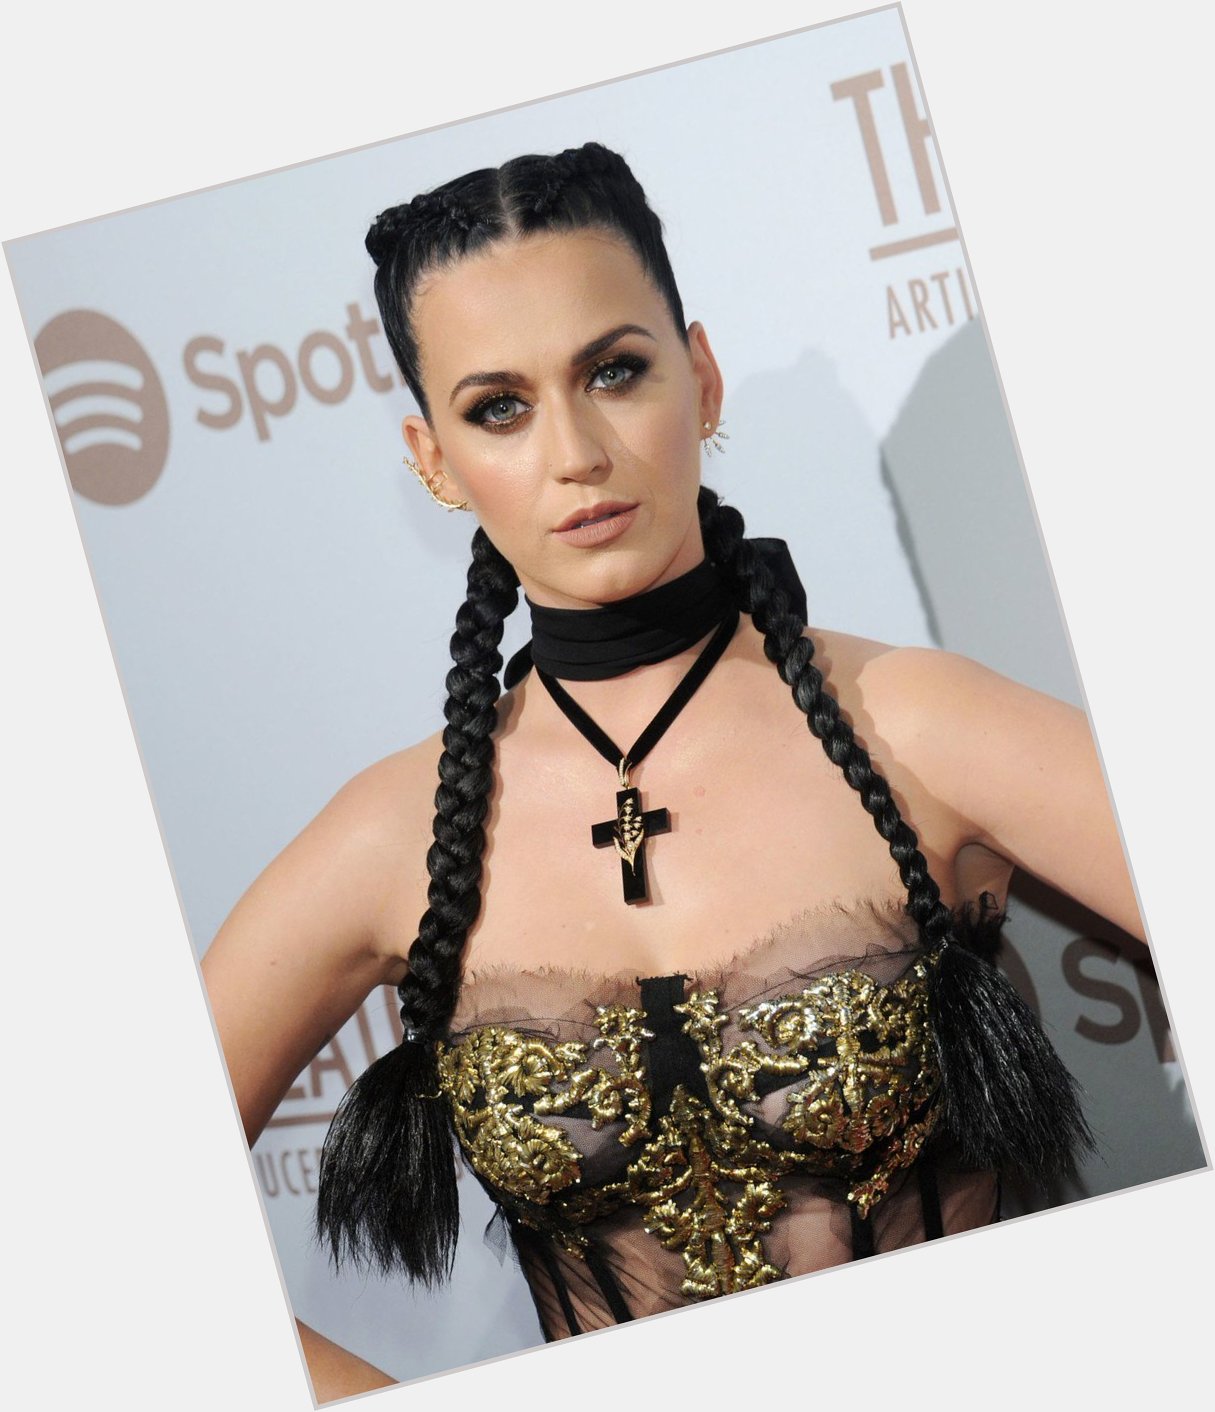 Happy birthday to Katy Perry! Still one of the very best! 